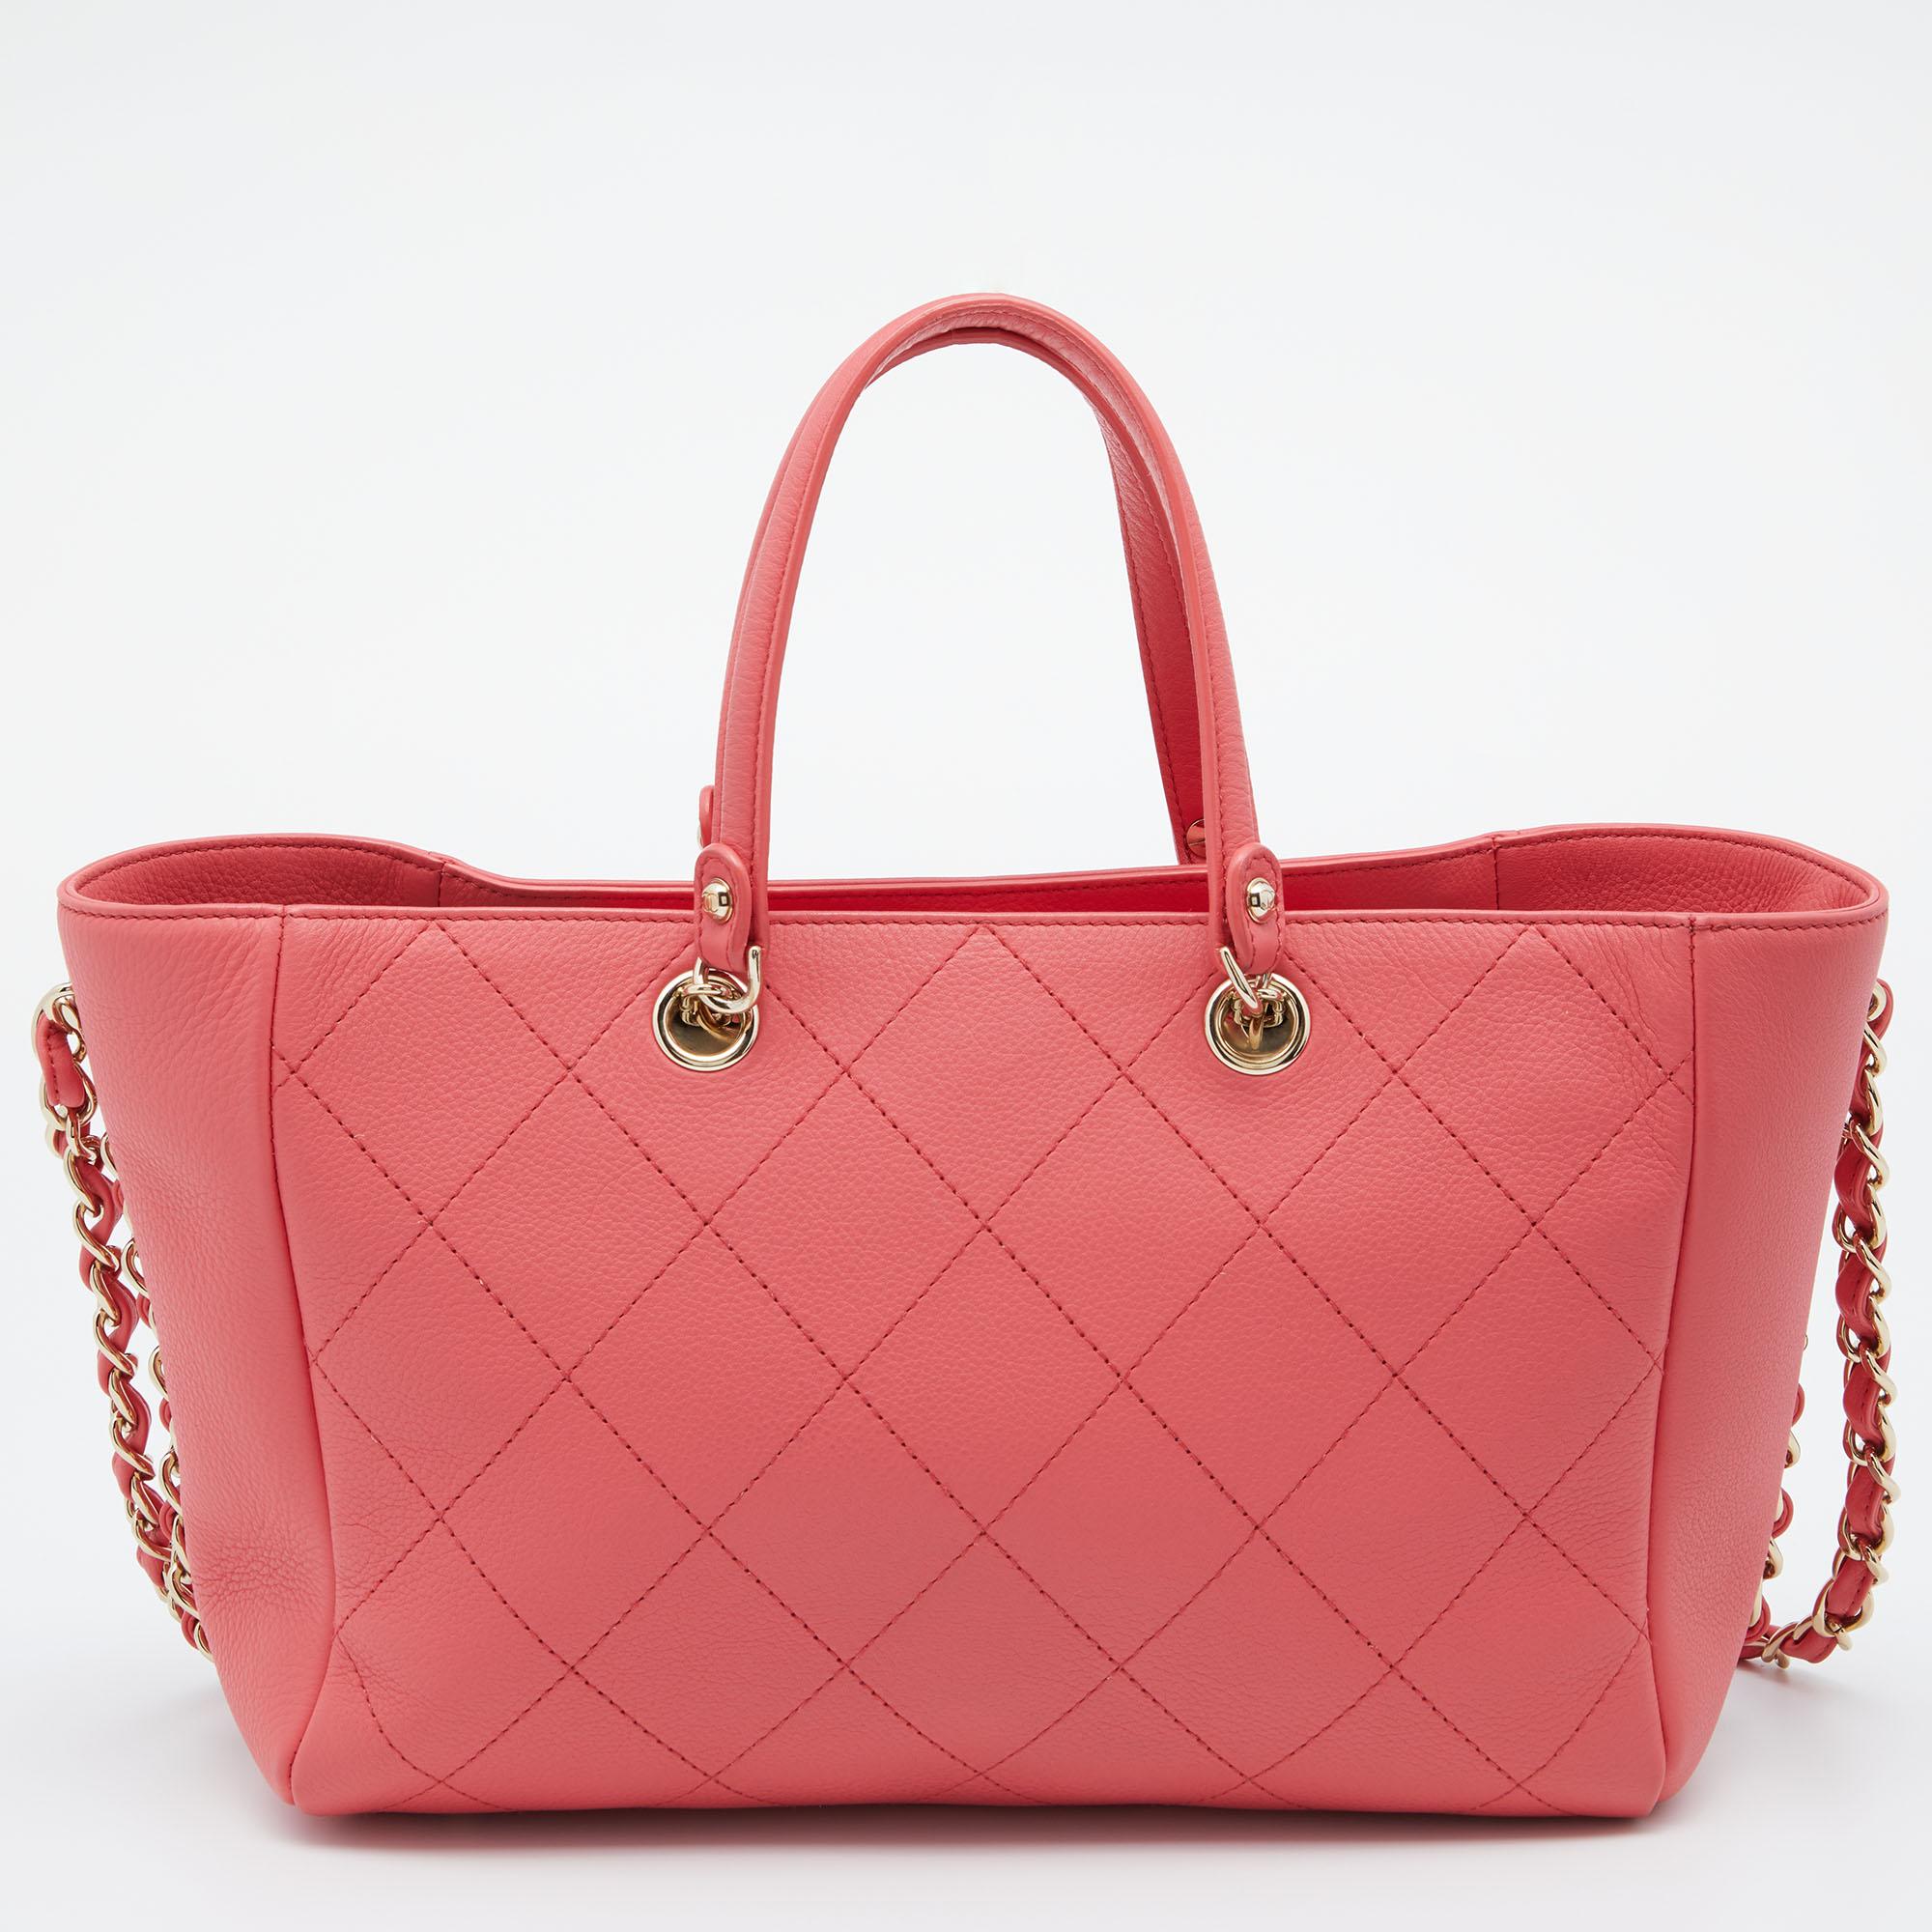 This Neo Soft shopping tote from the House of Chanel is great for everyday use. It is made from pink quilted leather, which is embellished with gold-tone hardware. It showcases dual handles and a nylon-lined interior. This tote will make you look